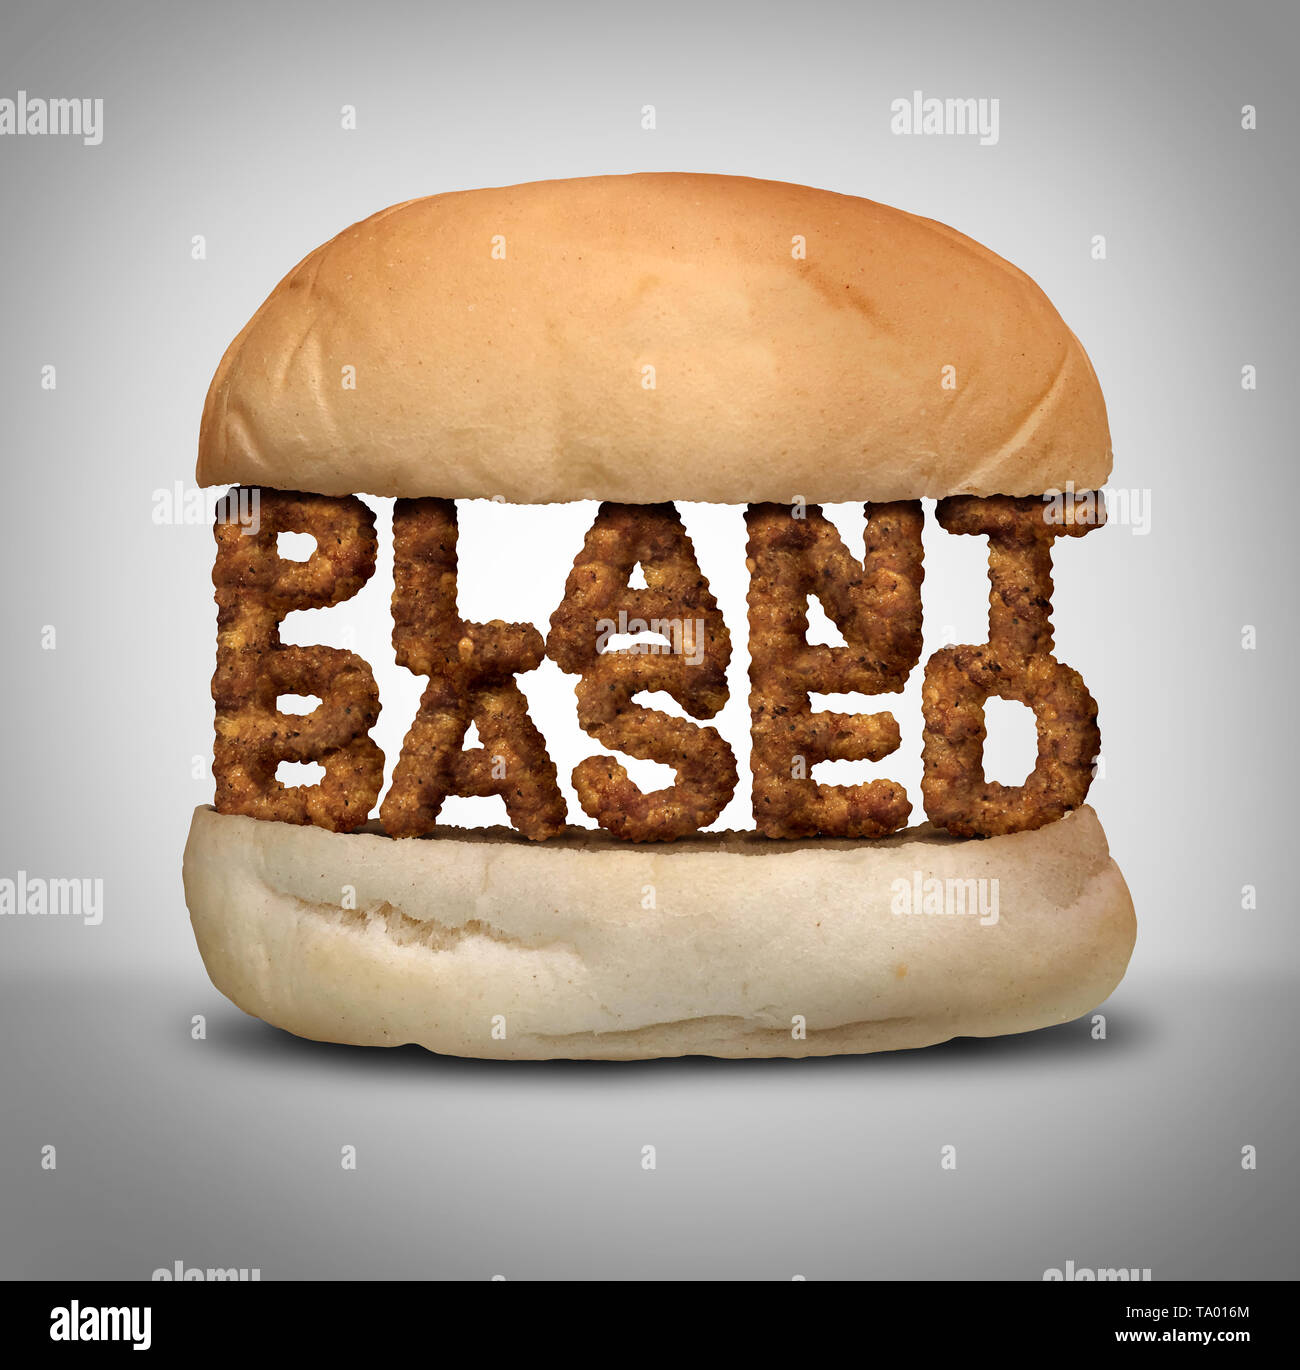 Plant based burger as fake meat or vegan hamburger representing a vegetarian protein in a 3D illustration style. Stock Photo